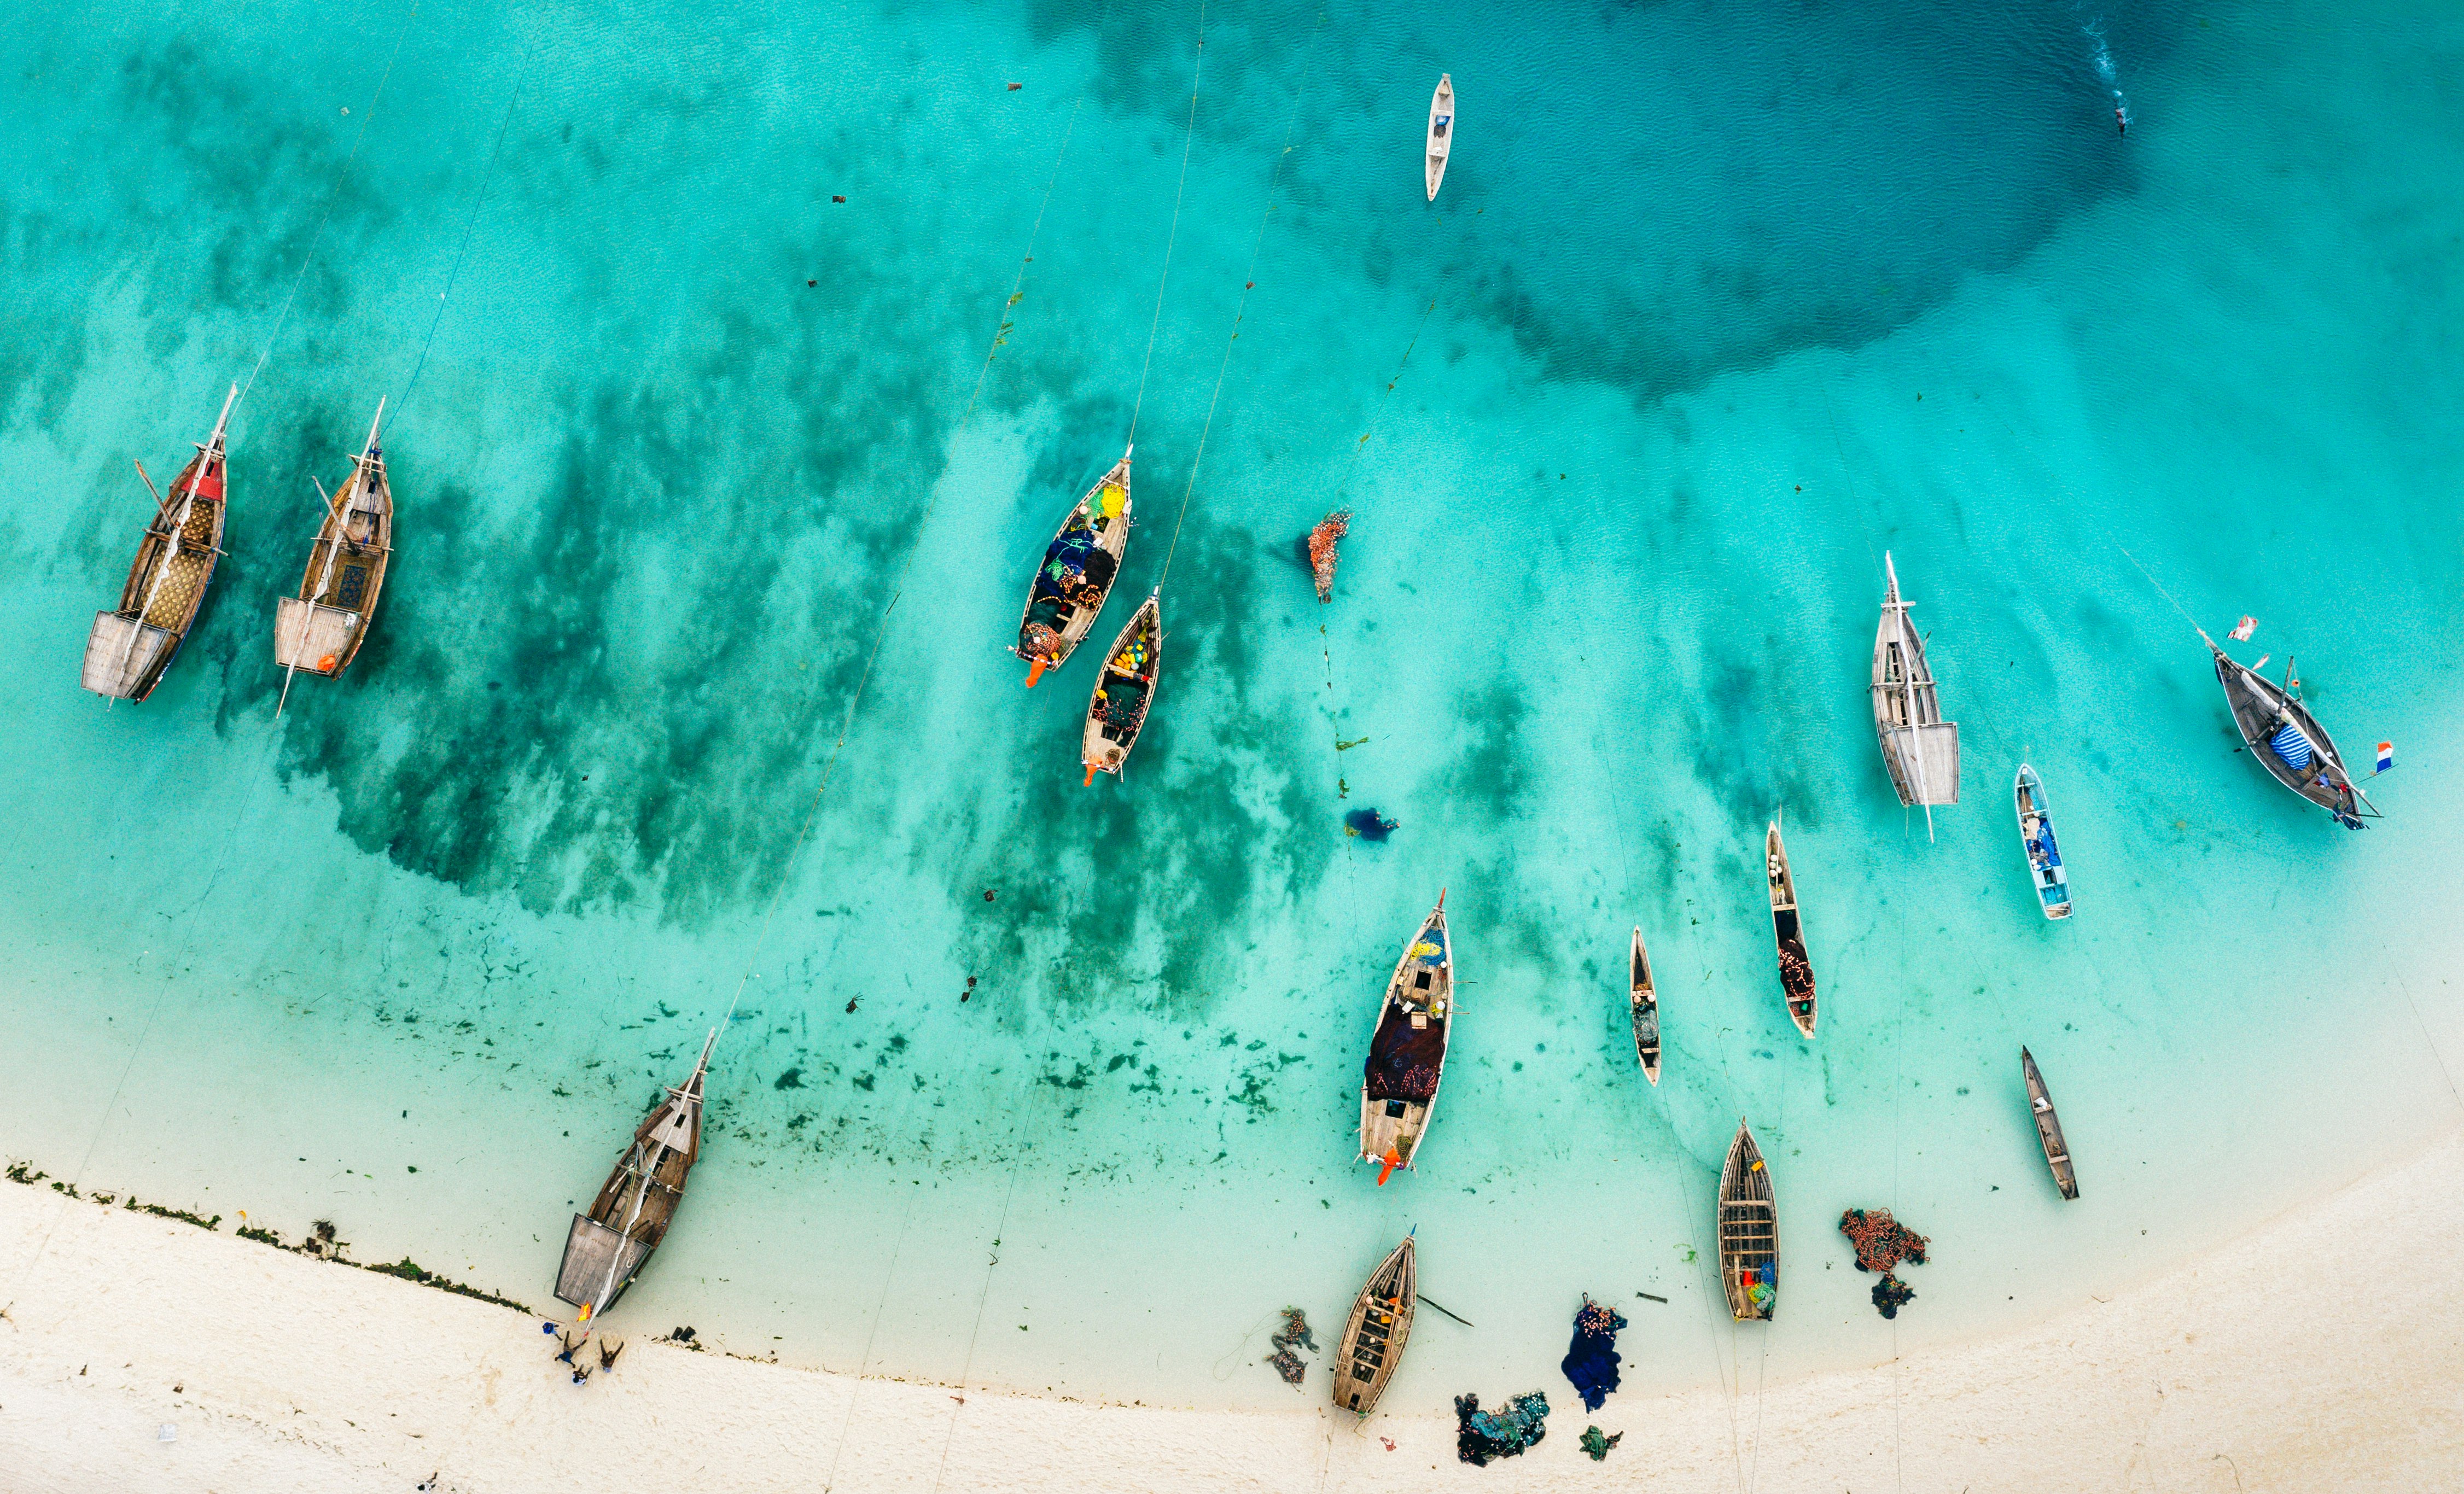 A drone shot shows the crystal blue waters and boats at a beach in Zanzibar. 